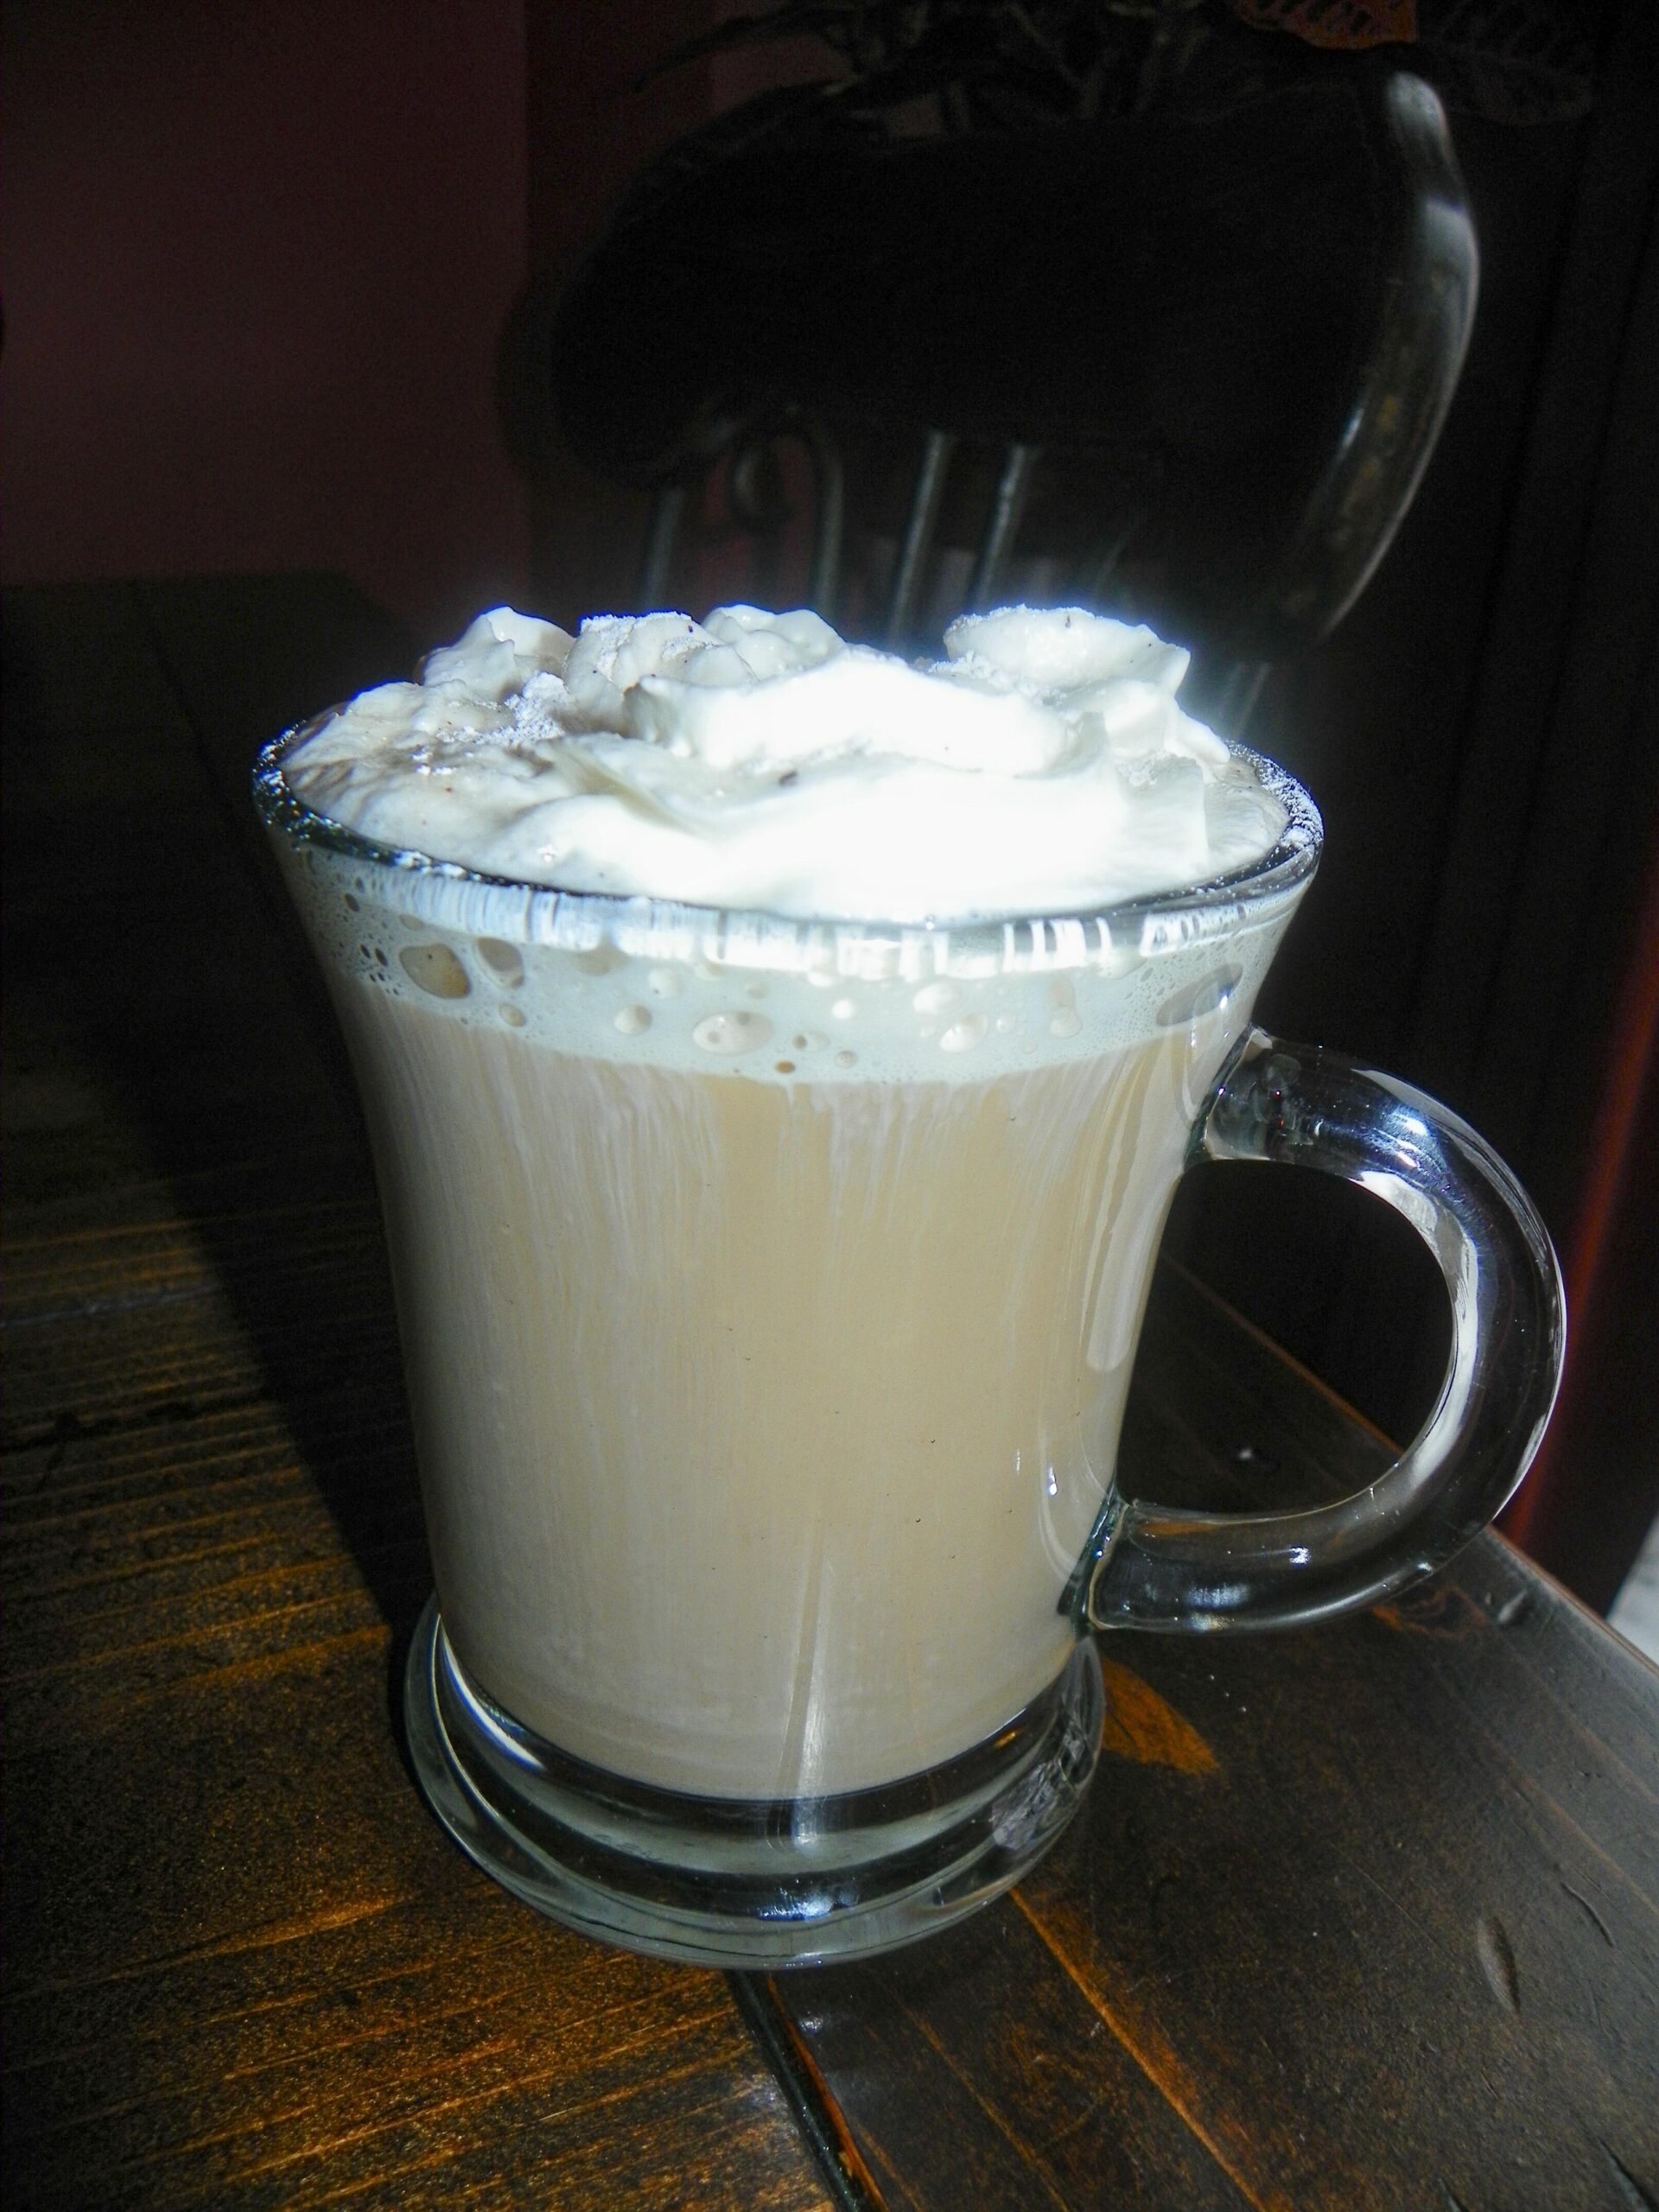  Get ready to indulge in a sweet, creamy Vanilla Latte!